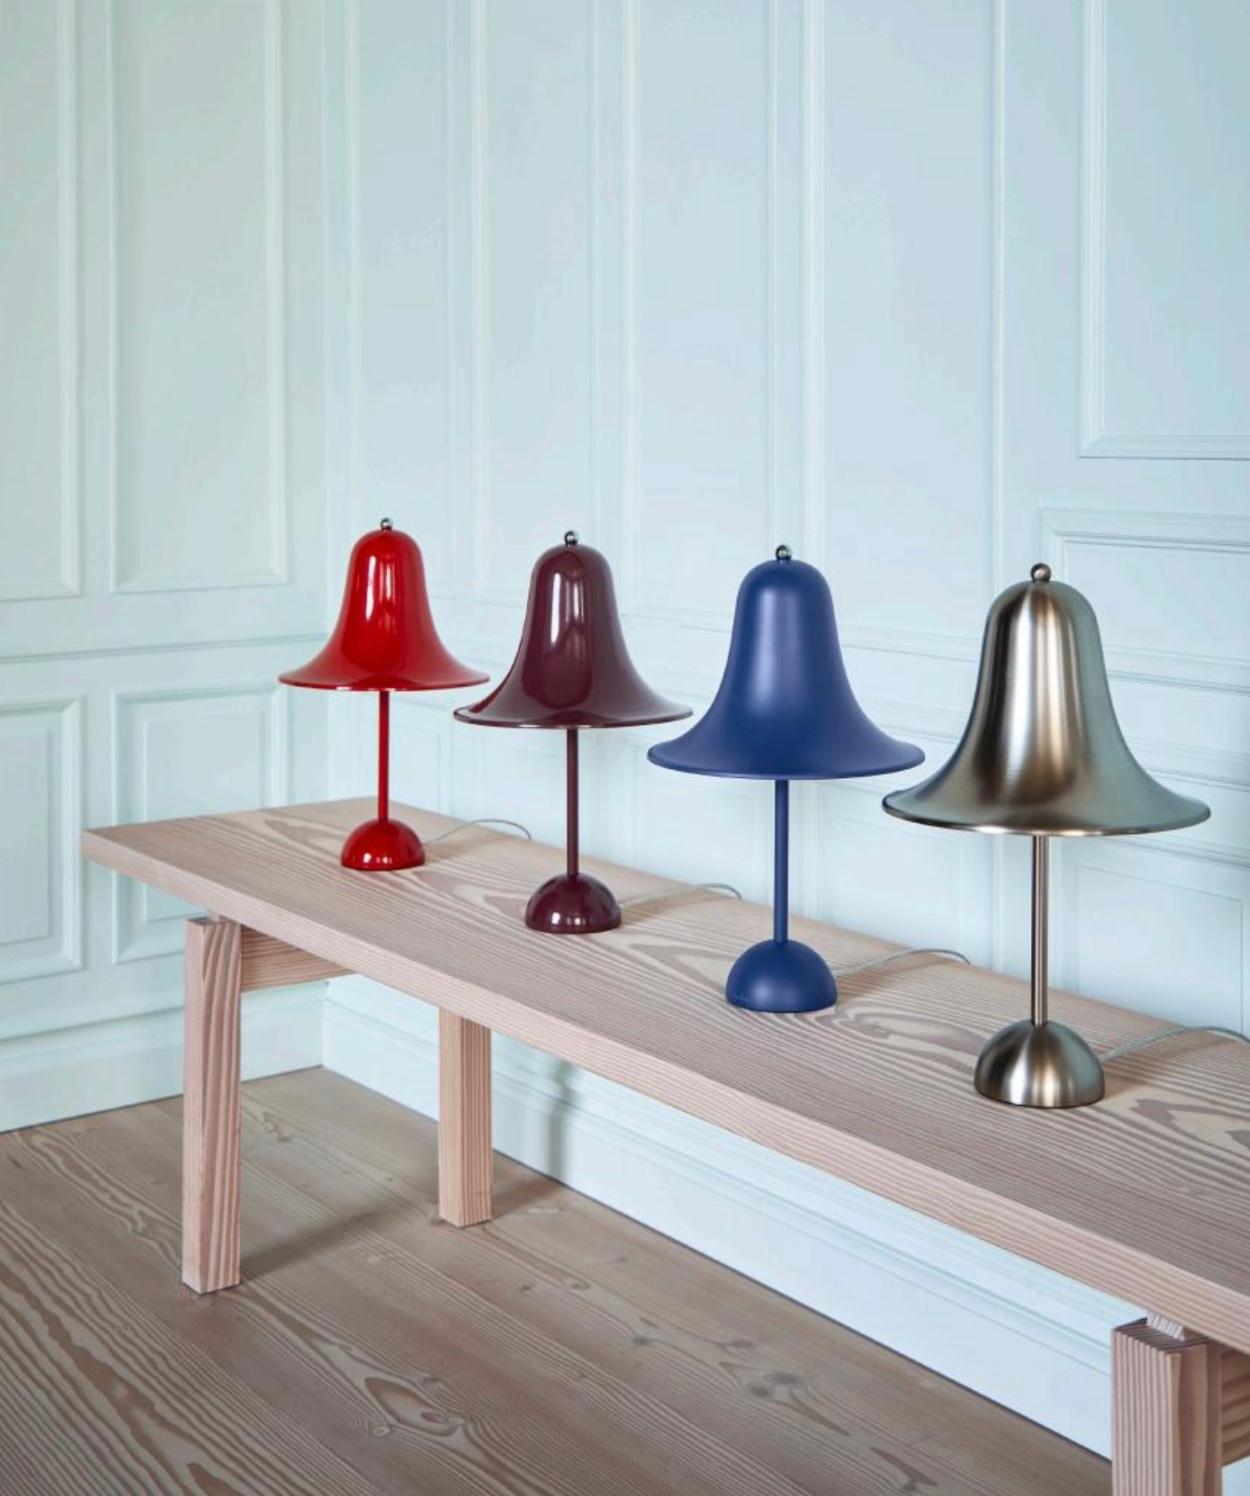 Verner Panton 'Pantop' table lamp in 'Terracotta' for Verpan. Designed in 1980. New, current production.

The elegant Pantop line was designed by Verner Panton in 1980, and has for a long time been a staple of the Verpan collection. Pantop is